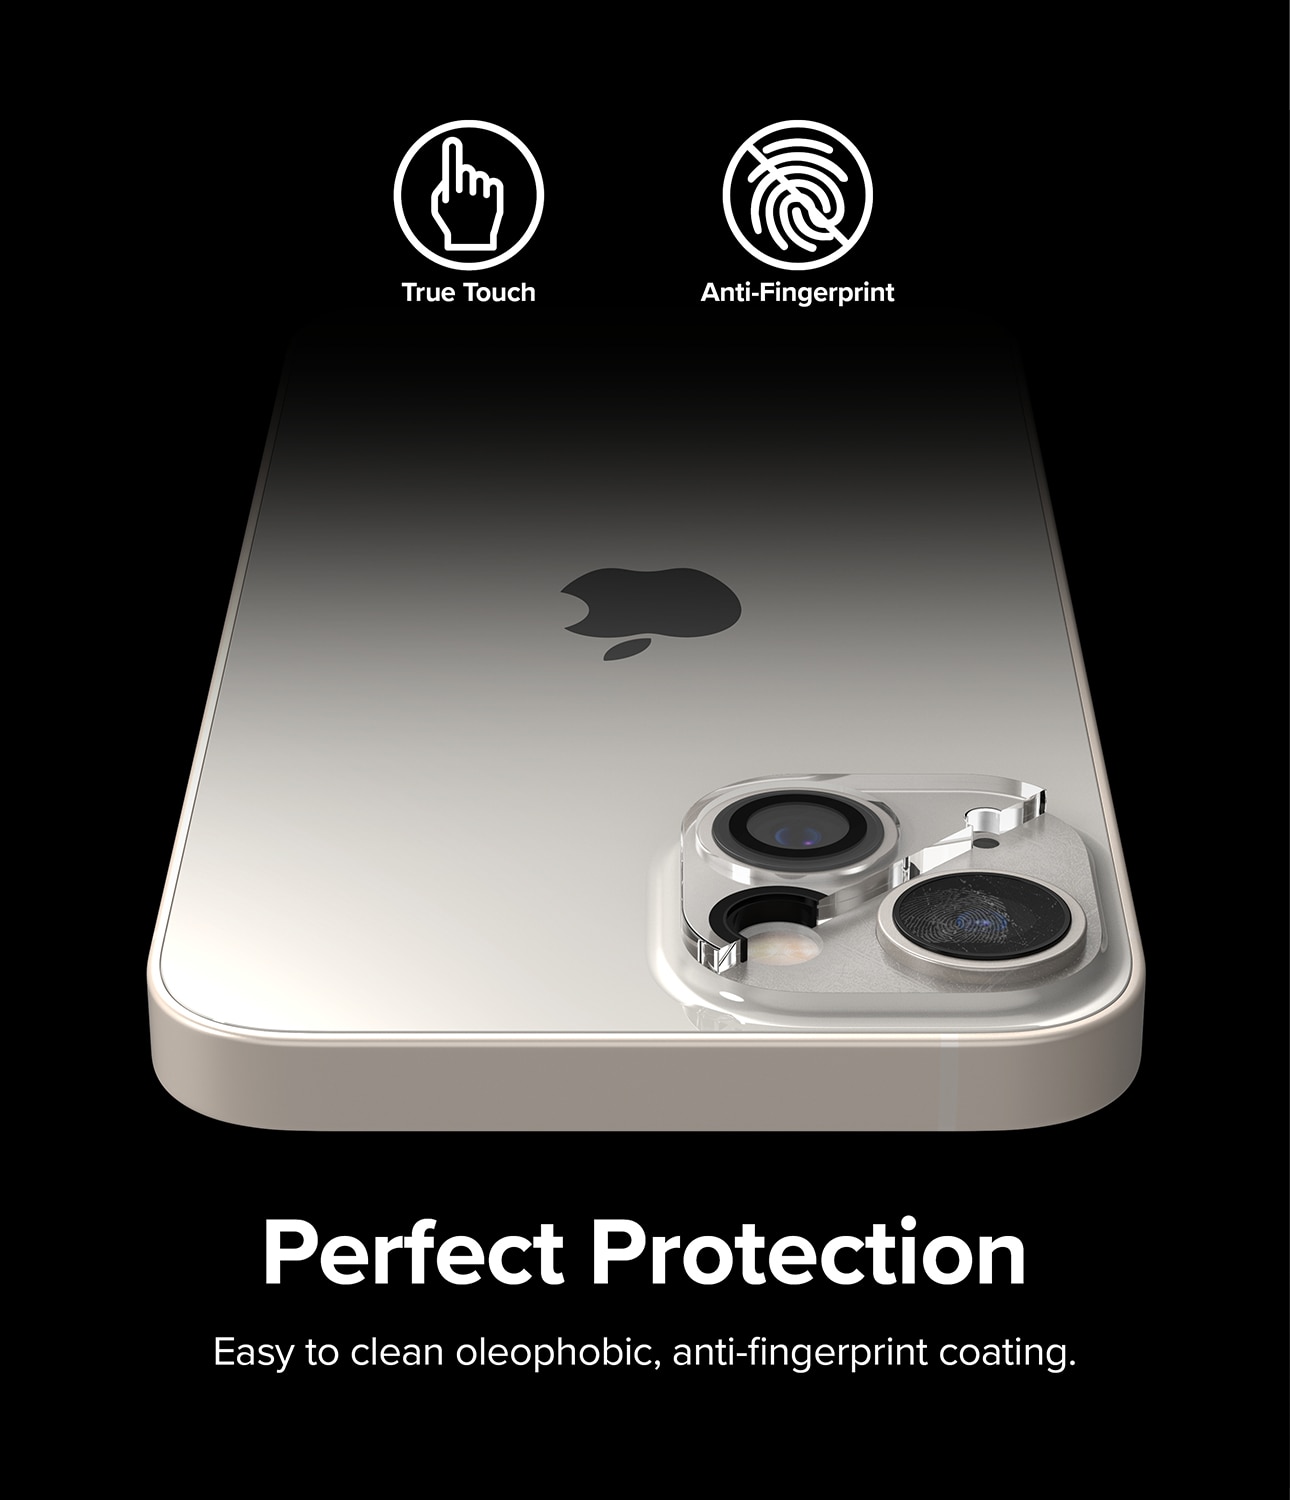 iPhone 14 Camera Protector Glass (2-pack) Transparent